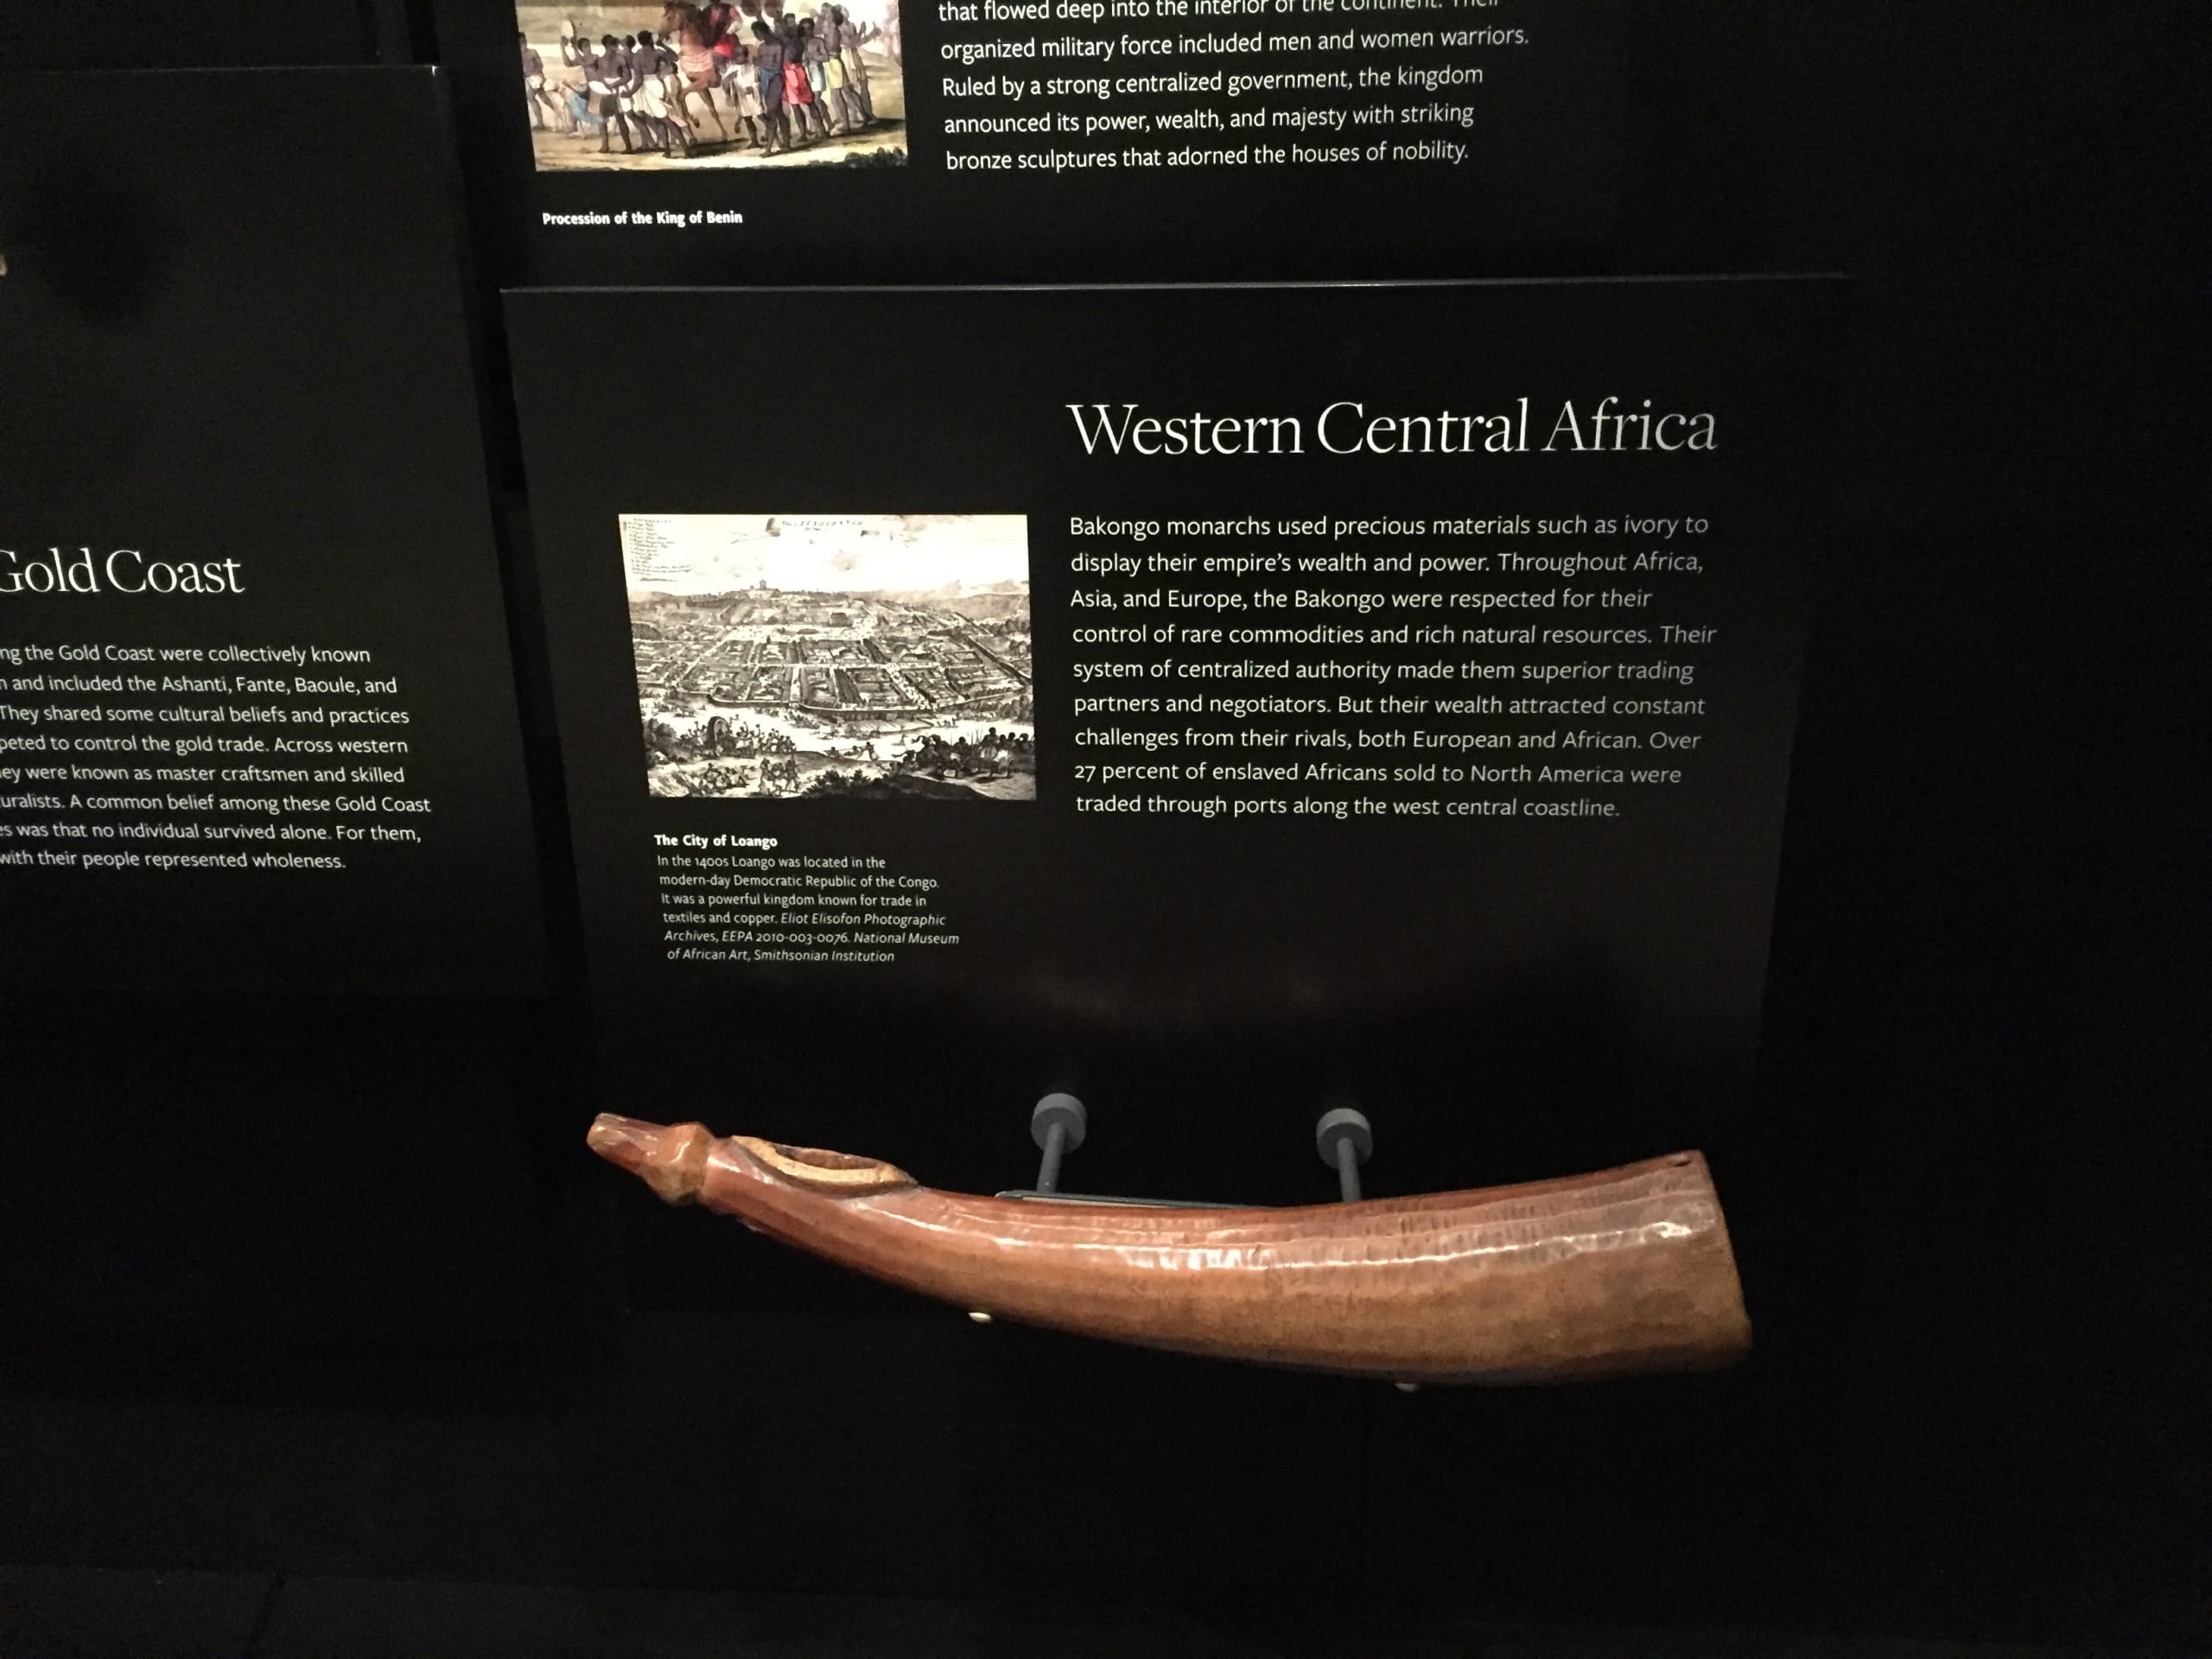 National Museum for African American History and Culture, Smithsonian Institution, Washington D.C., 2019. "Trading to Traded" in the History galleries. An ivory Oliphant (trumpet) in the foreground